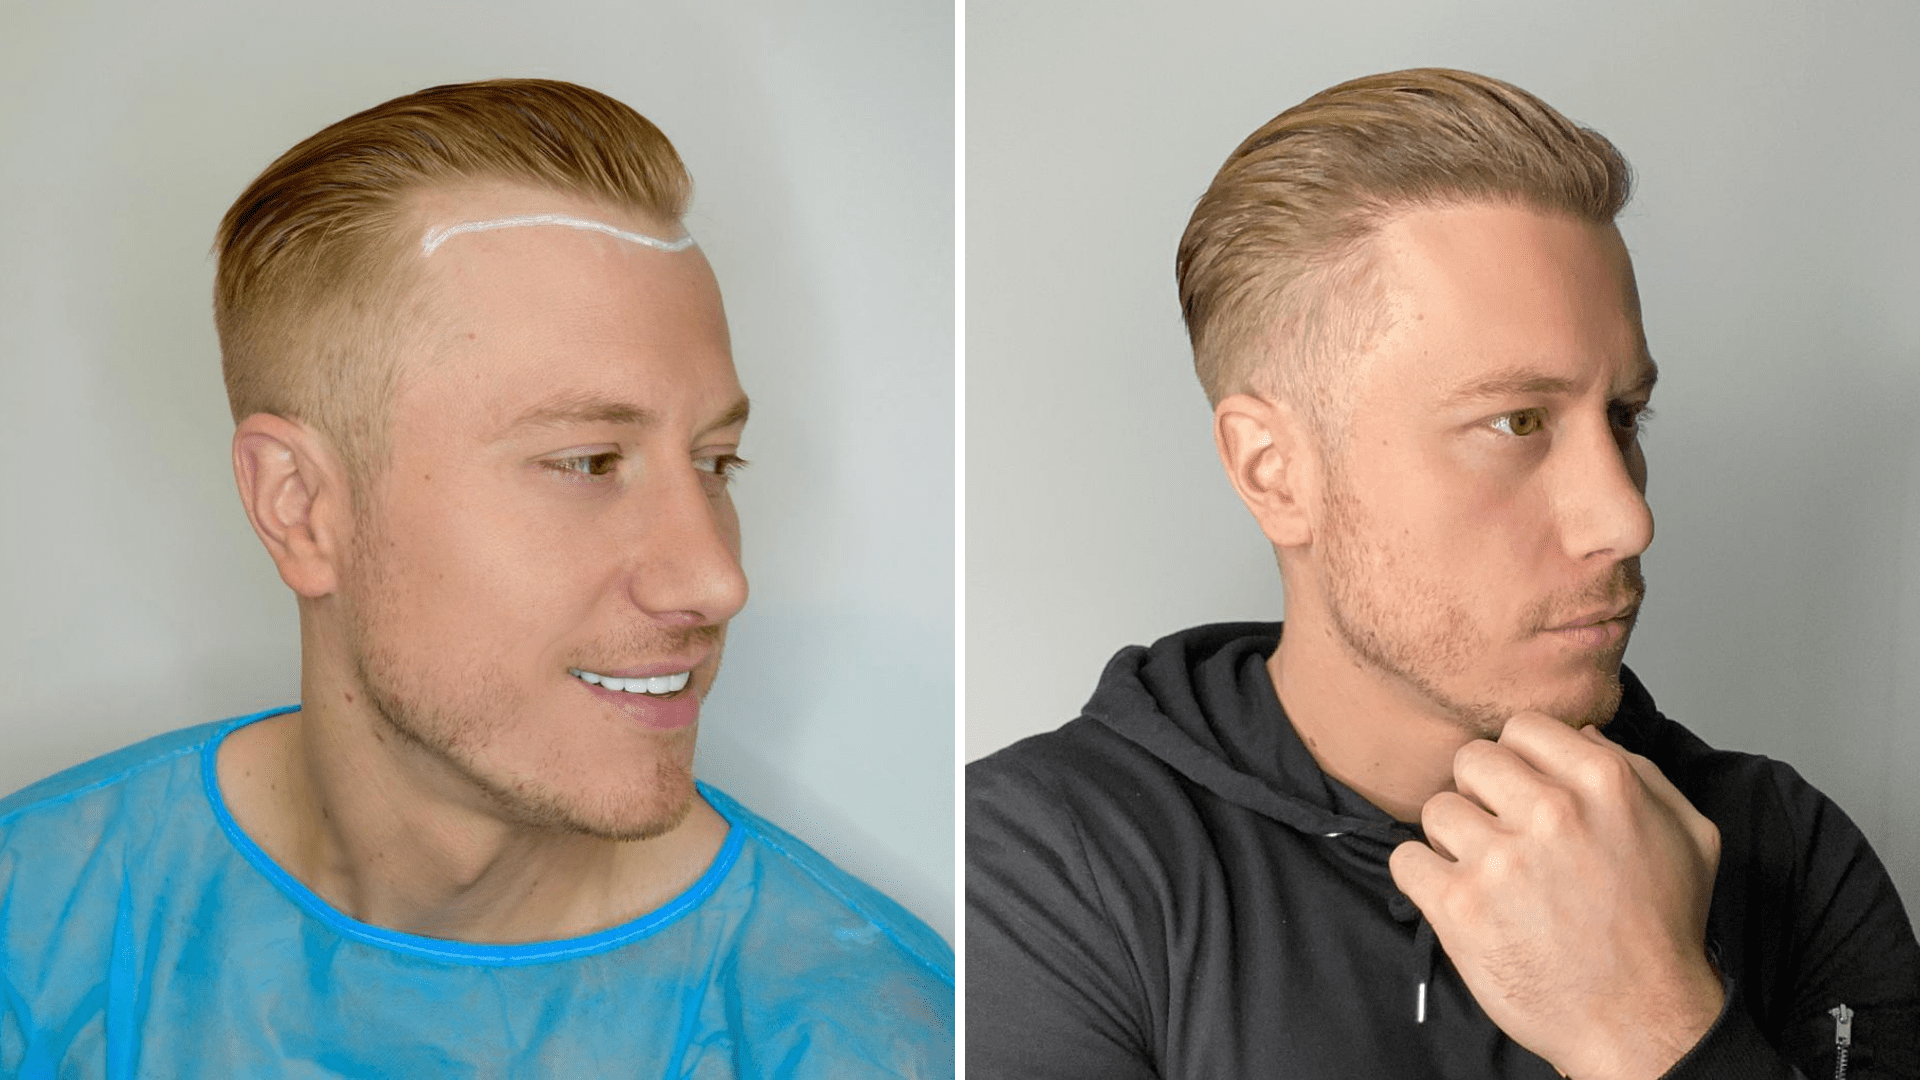 Hair transplant growth stages week by week and month by month [Progress]